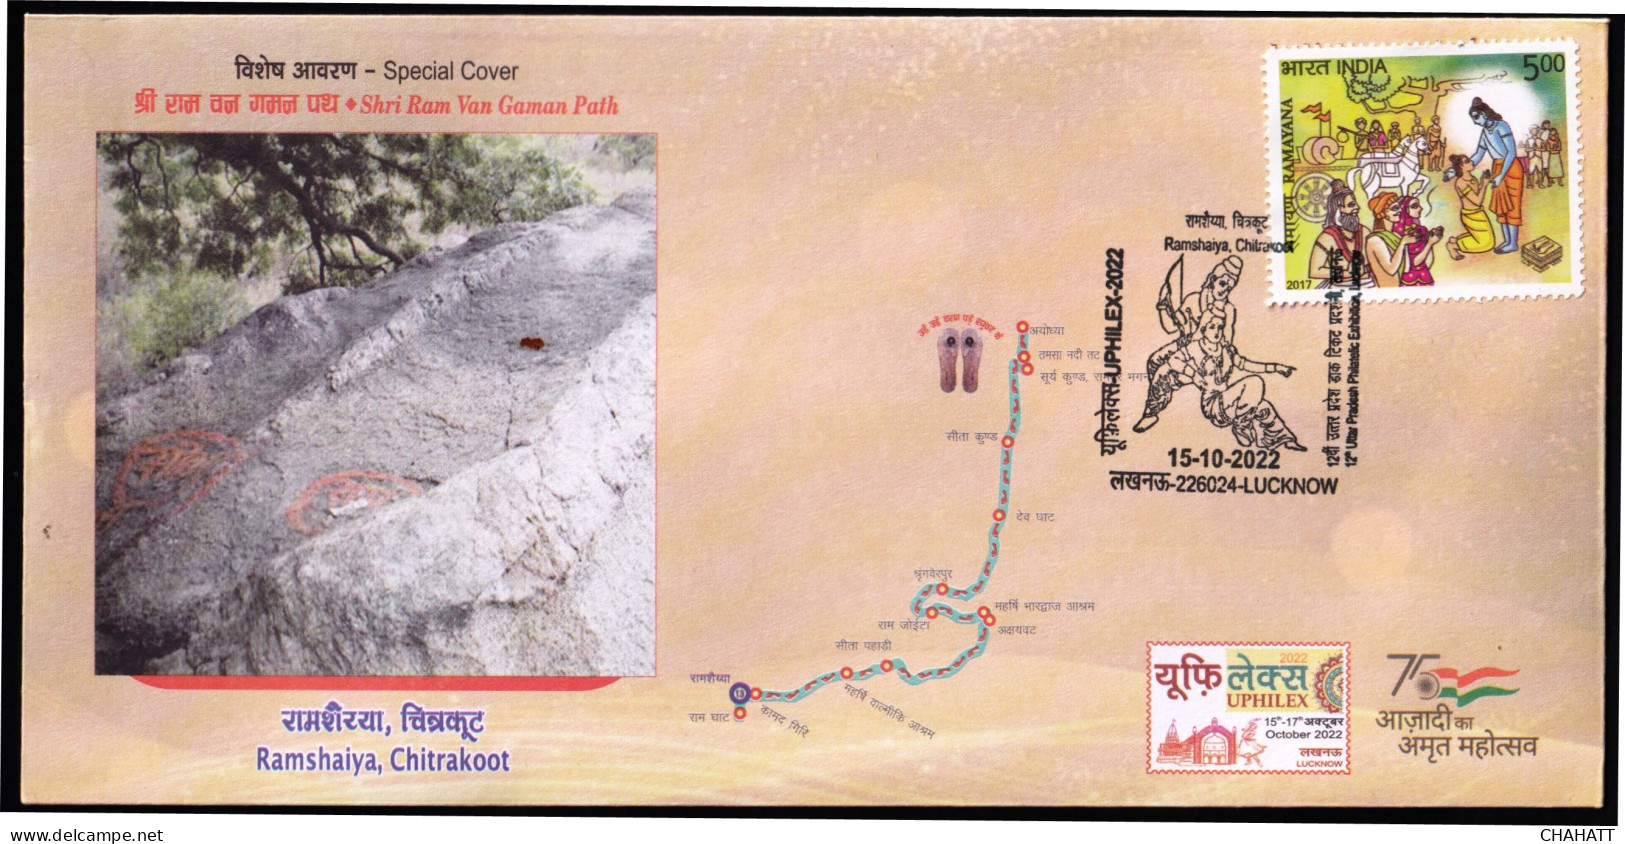 HINDUISM - RAMAYAN -CHITRAKOOT - ARCHERY - PICTORIAL CANCELLATION - SPECIAL COVER - INDIA -2022- BX4-23 - Hinduismo